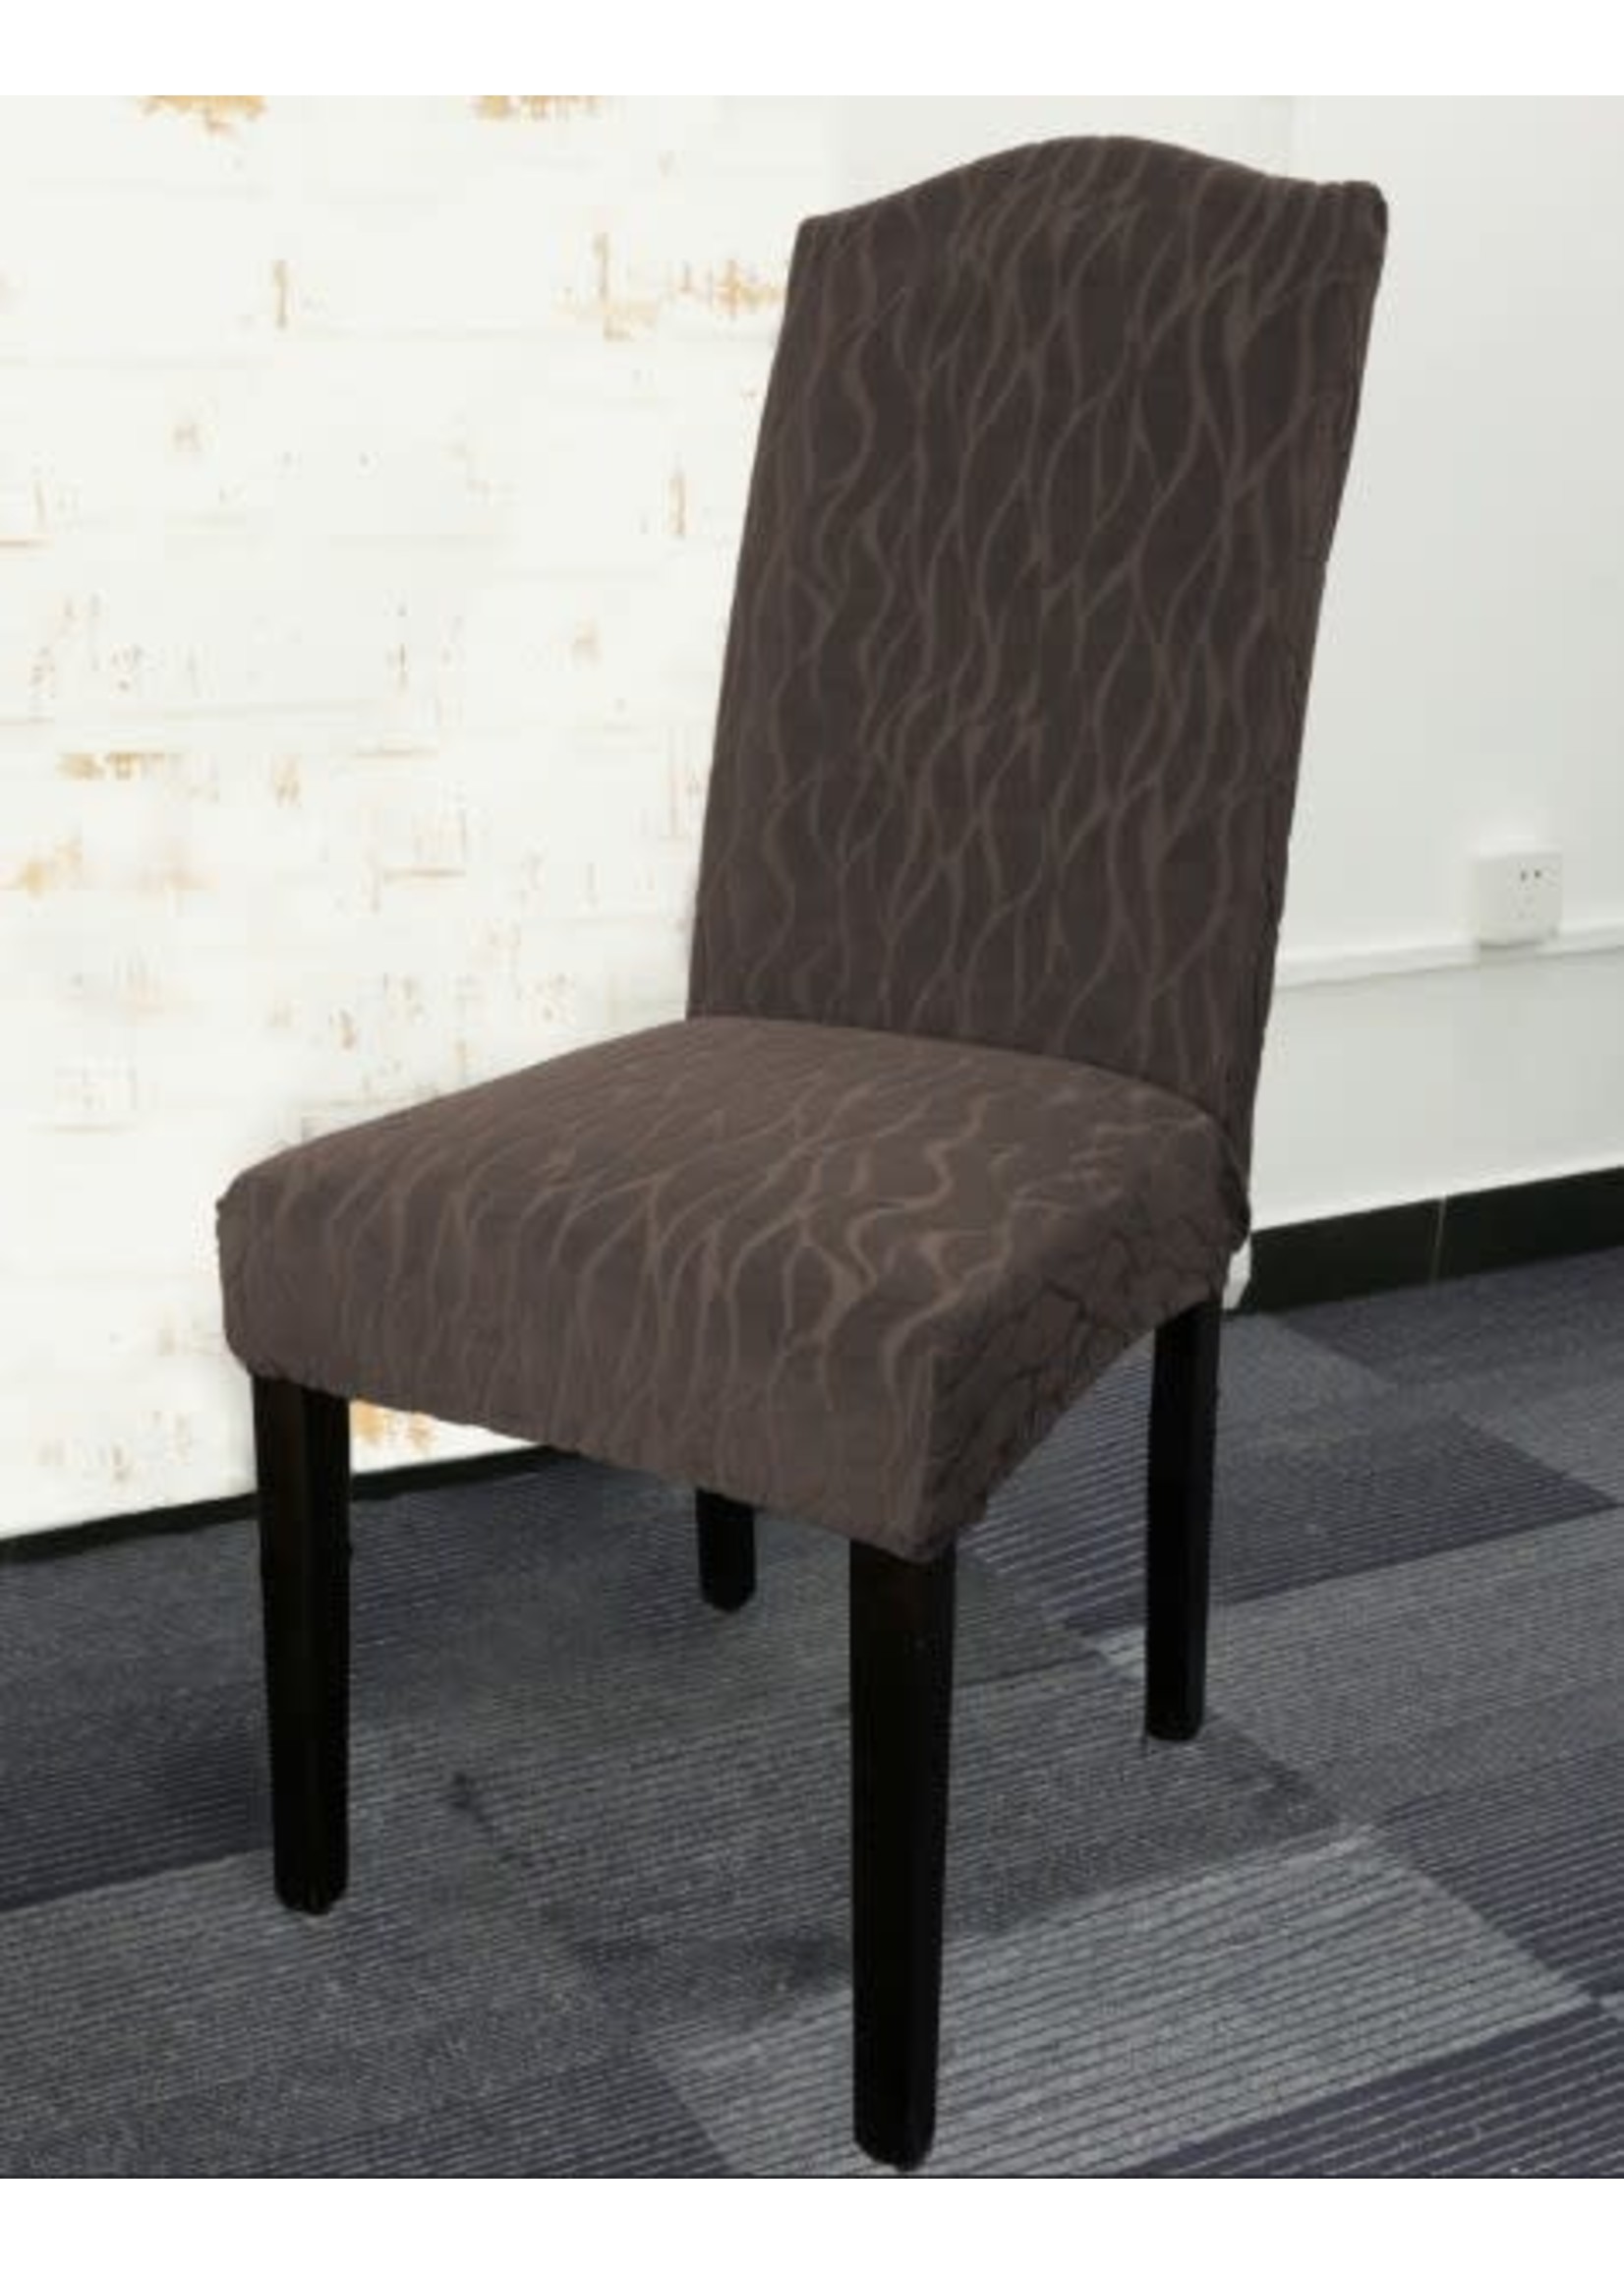 DINING CHAIR STRETCH SLIPCOVER BROWN